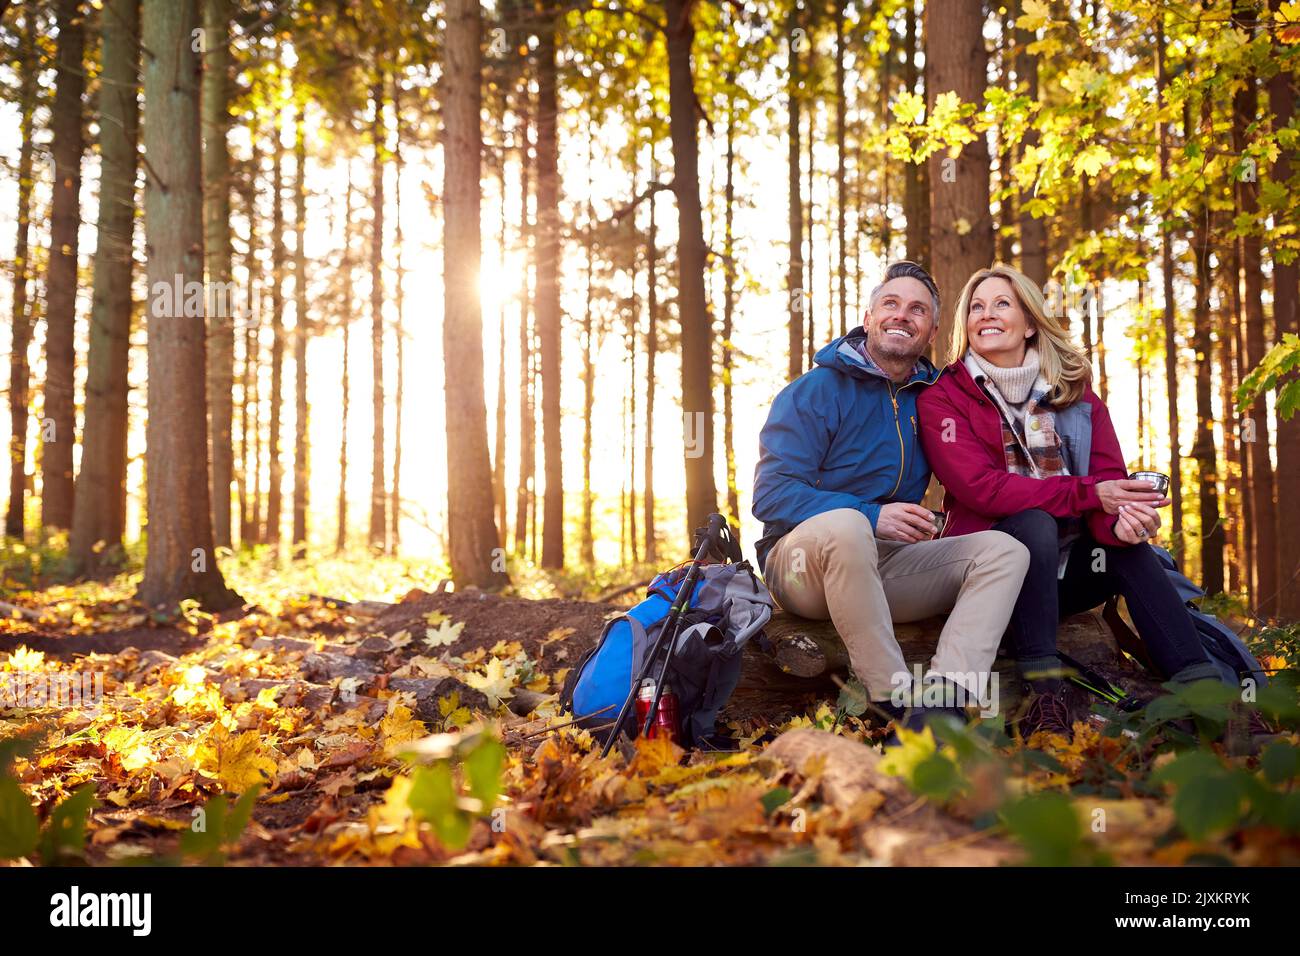 Mature Retired Couple Stop For Rest And Hot Drink On Walk Through Fall Or Winter Countryside Stock Photo